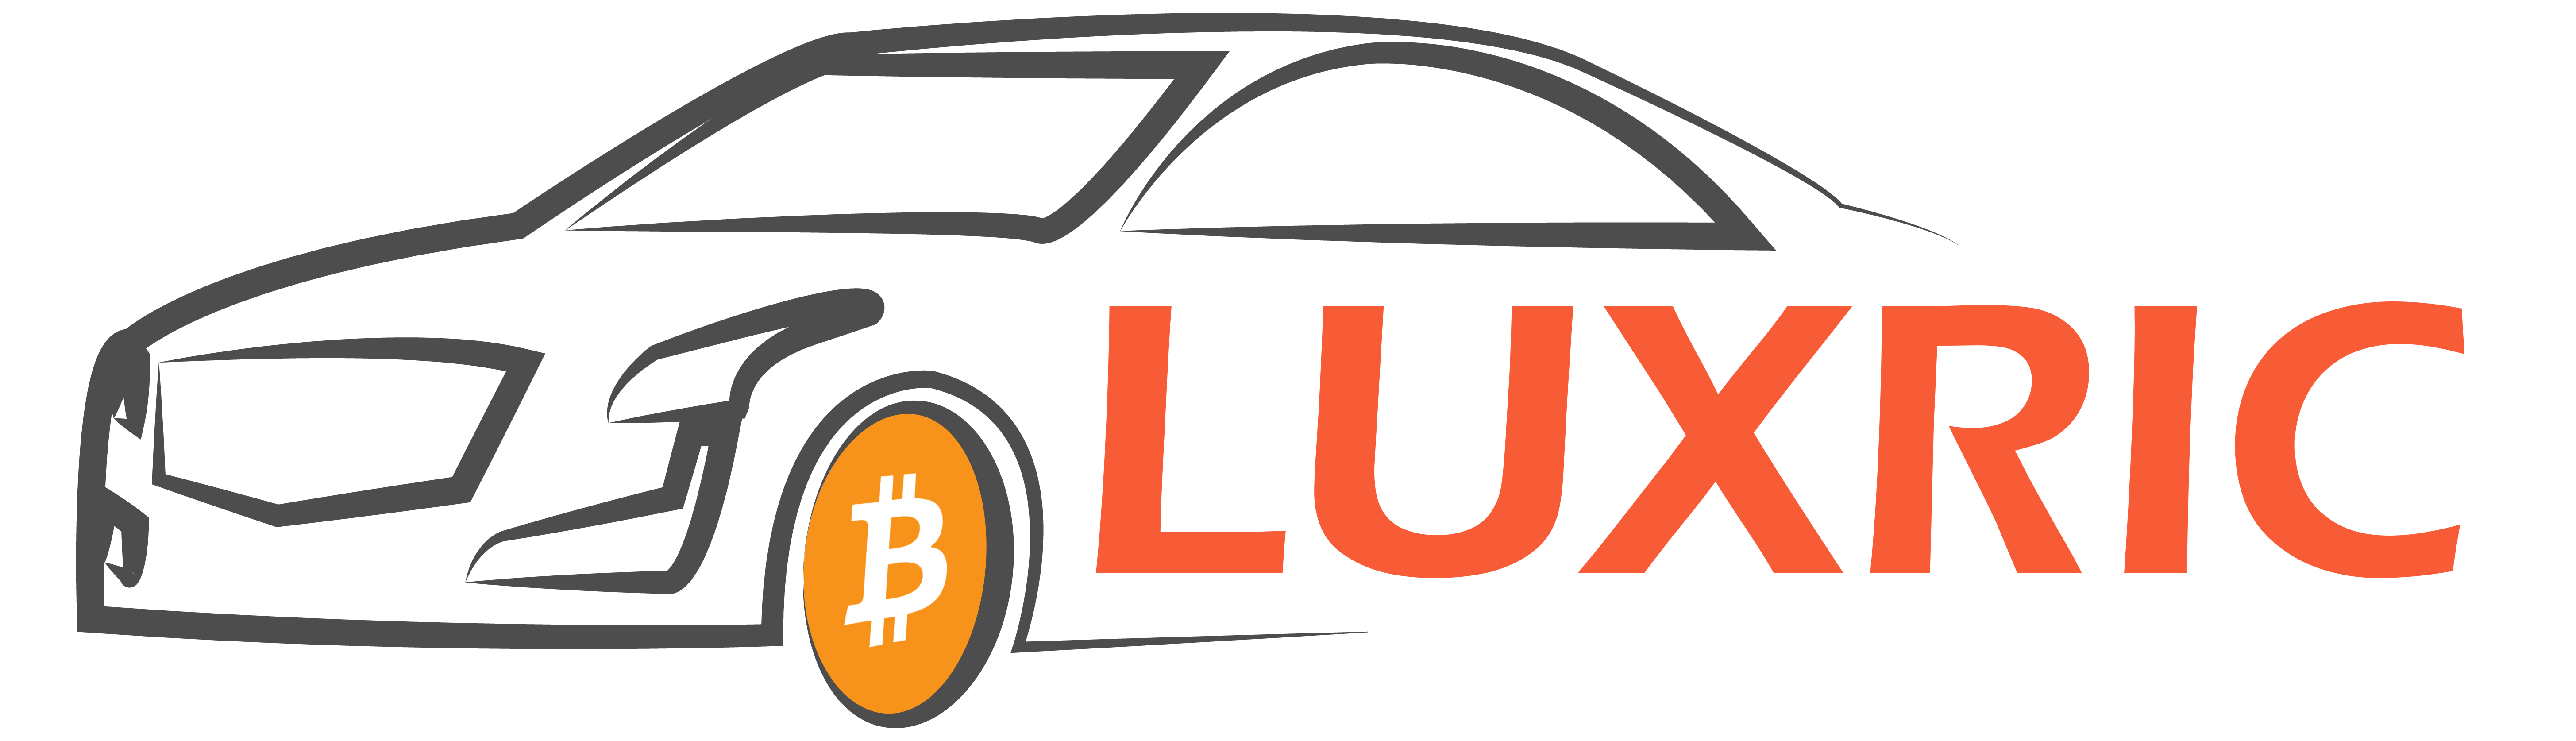 Luxric Limited Brings An Exciting Collection of Cars With A Delightful Investment Experience